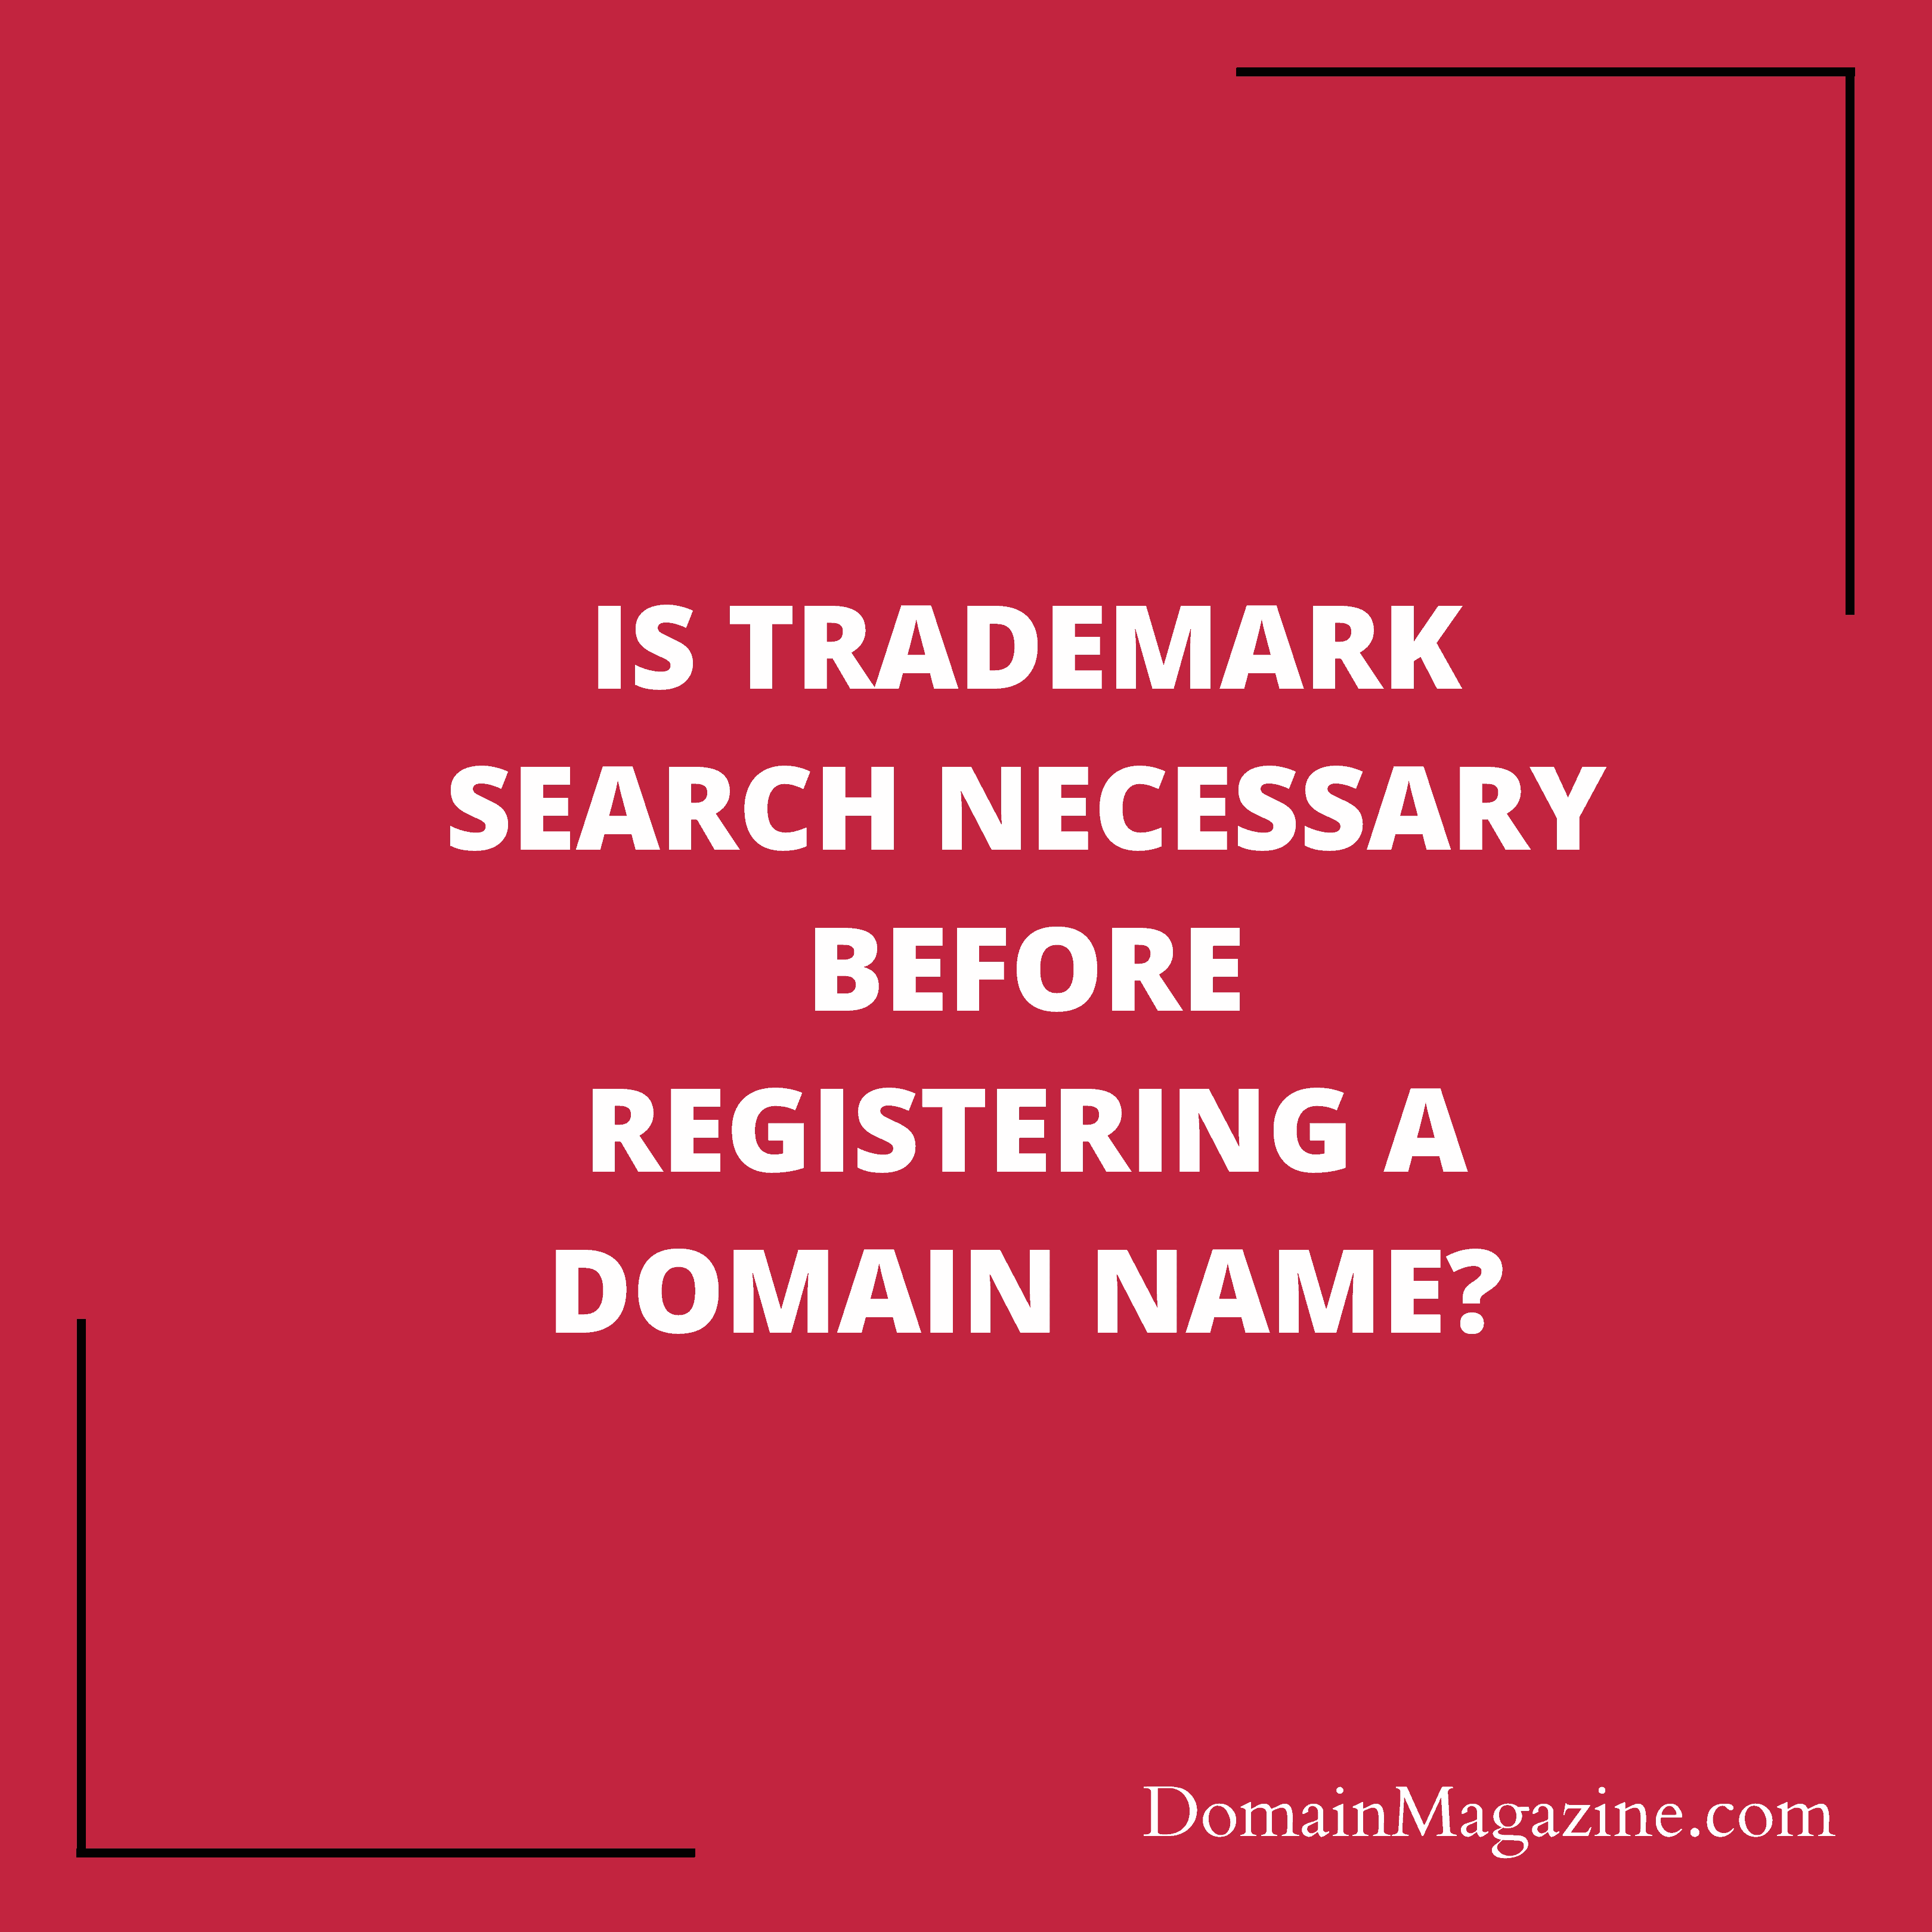 Is trademark search necessary before registering a domain name?